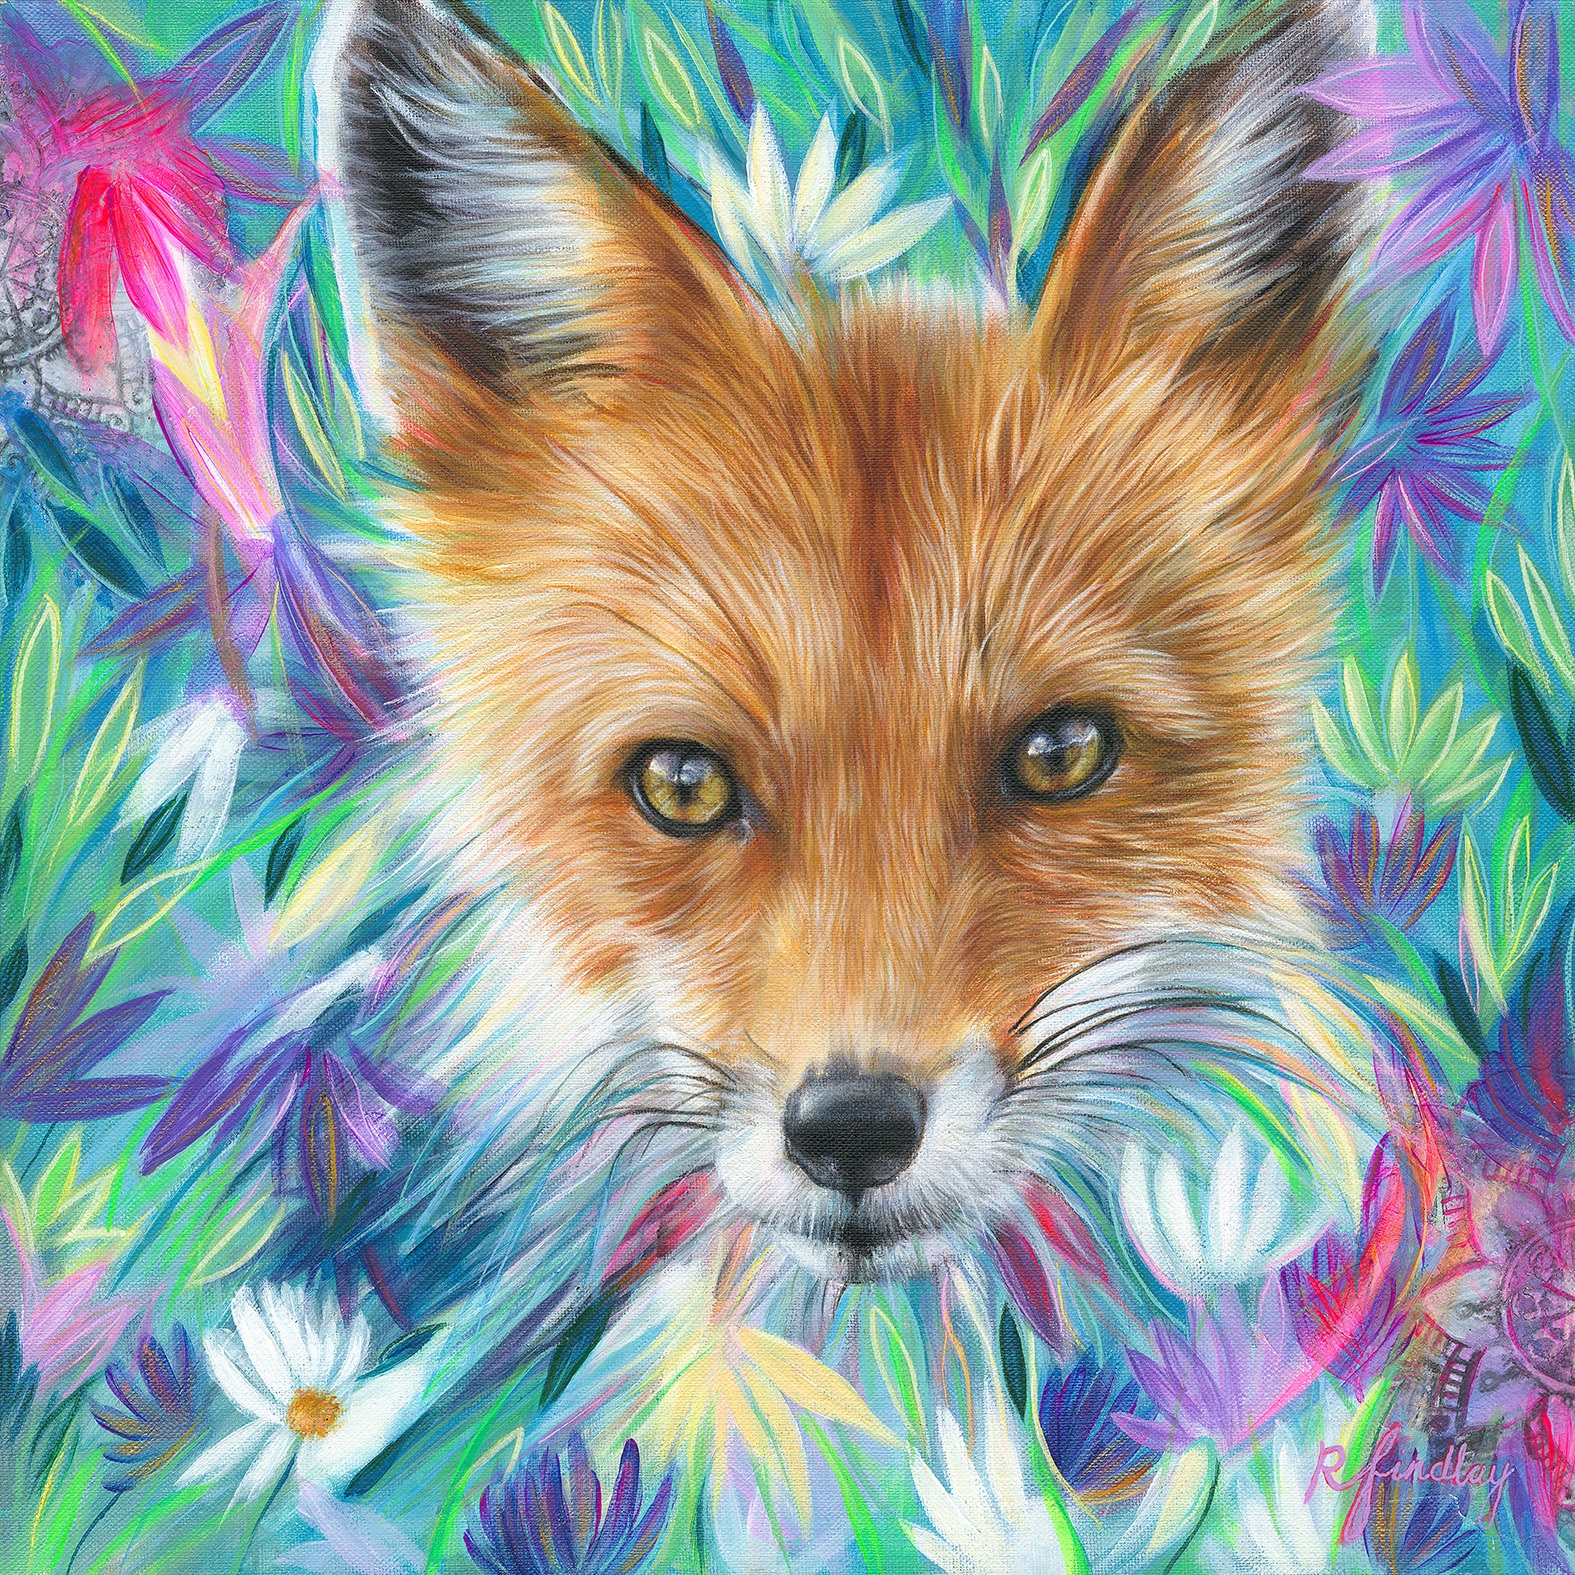 This is a colourful painting of a red fox surrounded by flowers.